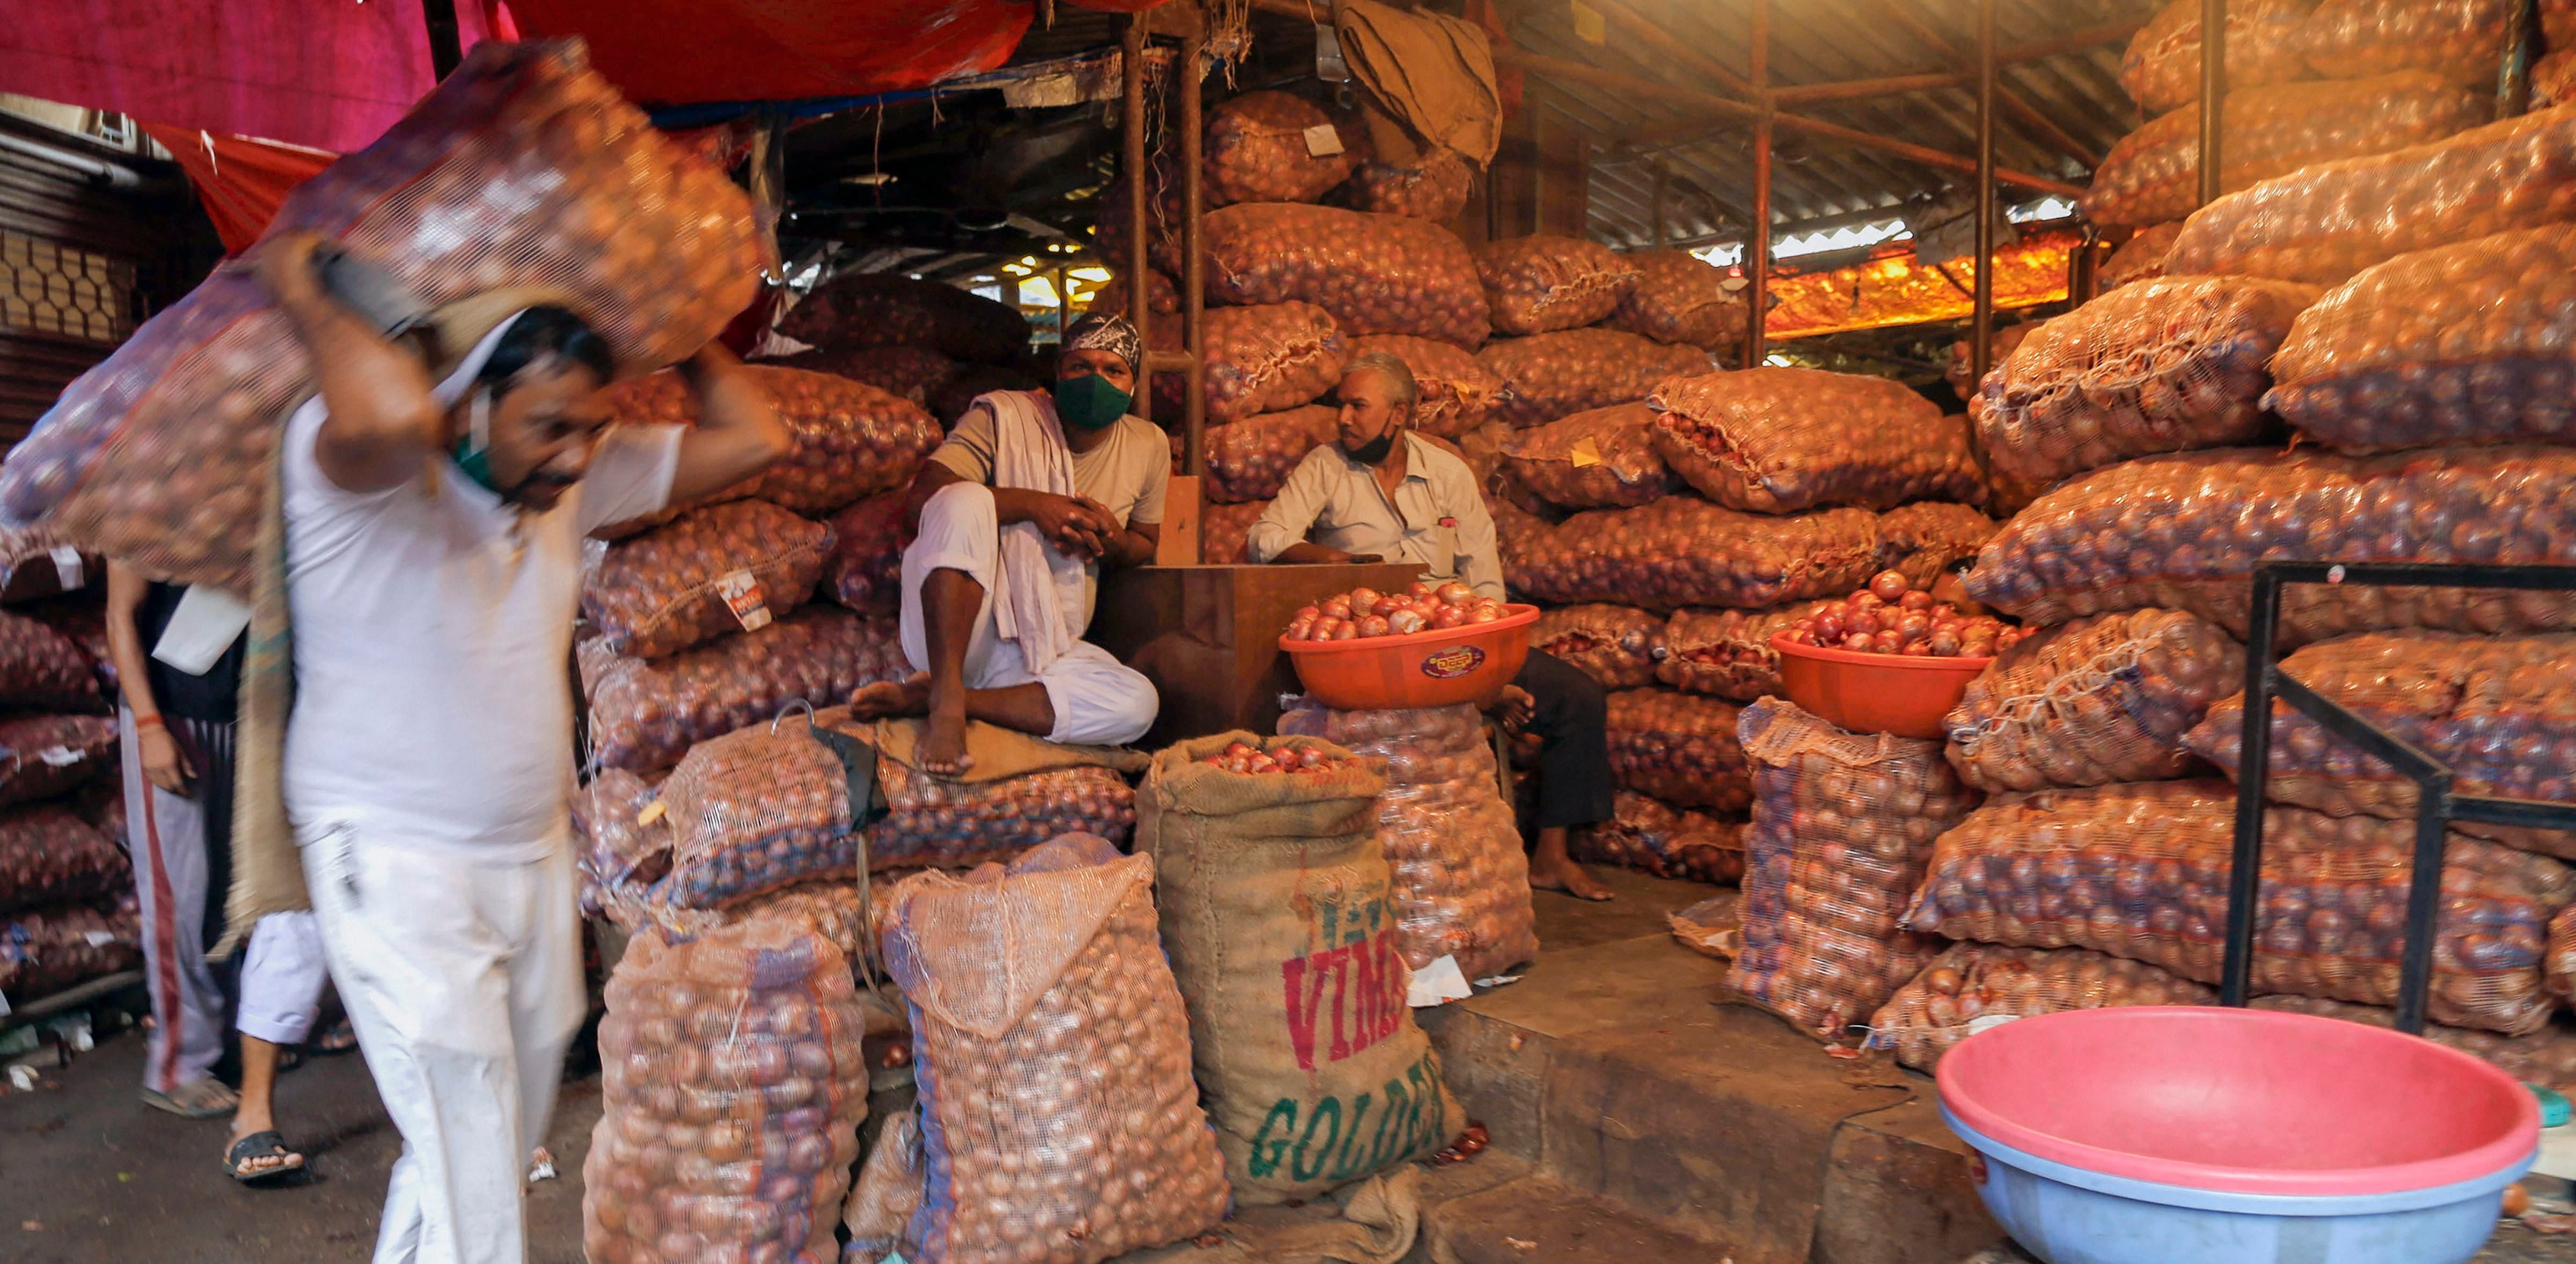 Food accounts for about 46% of India’s CPI, making it the highest among inflation-targeting countries.Credit: PTI